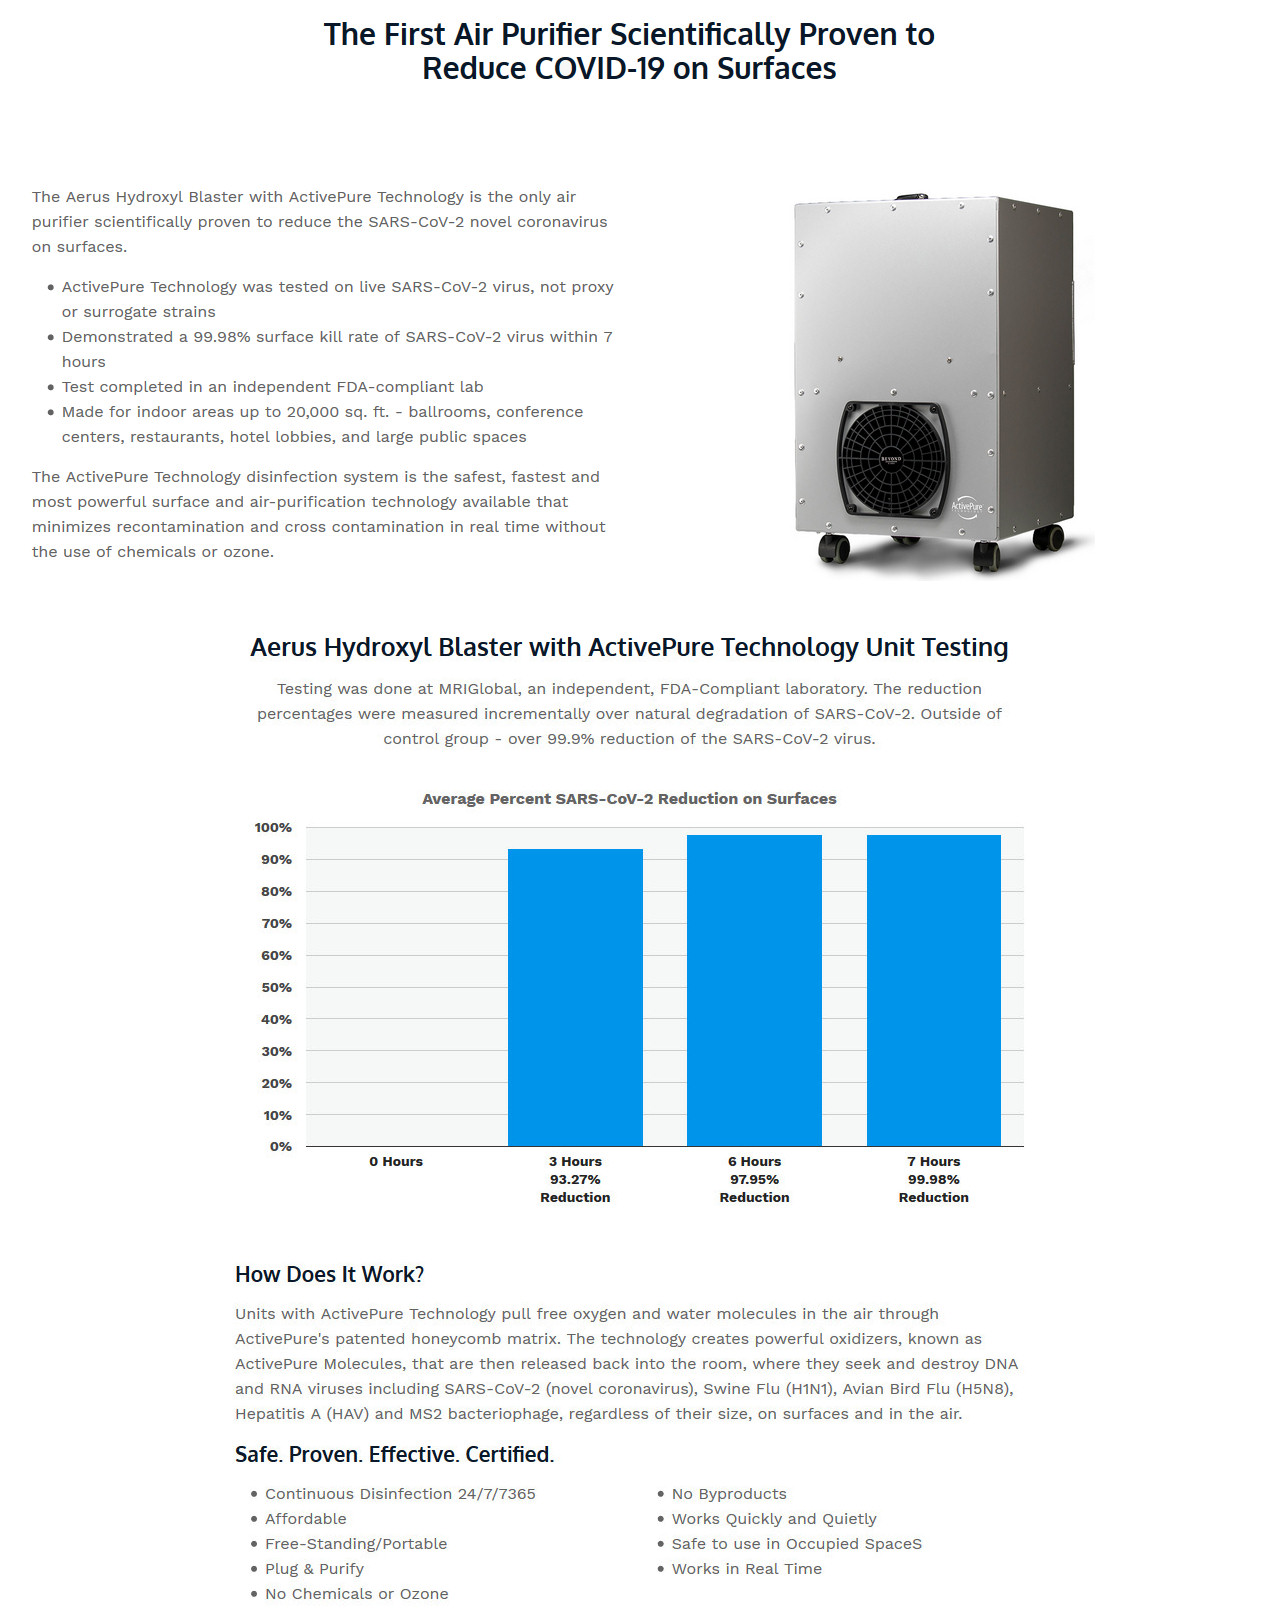 The Aerus Hydroxyl Blaster with ActivePure Technology is the only air purifier scientifically proven to reduce the SARS-CoV-2 novel coronavirus on surfaces.